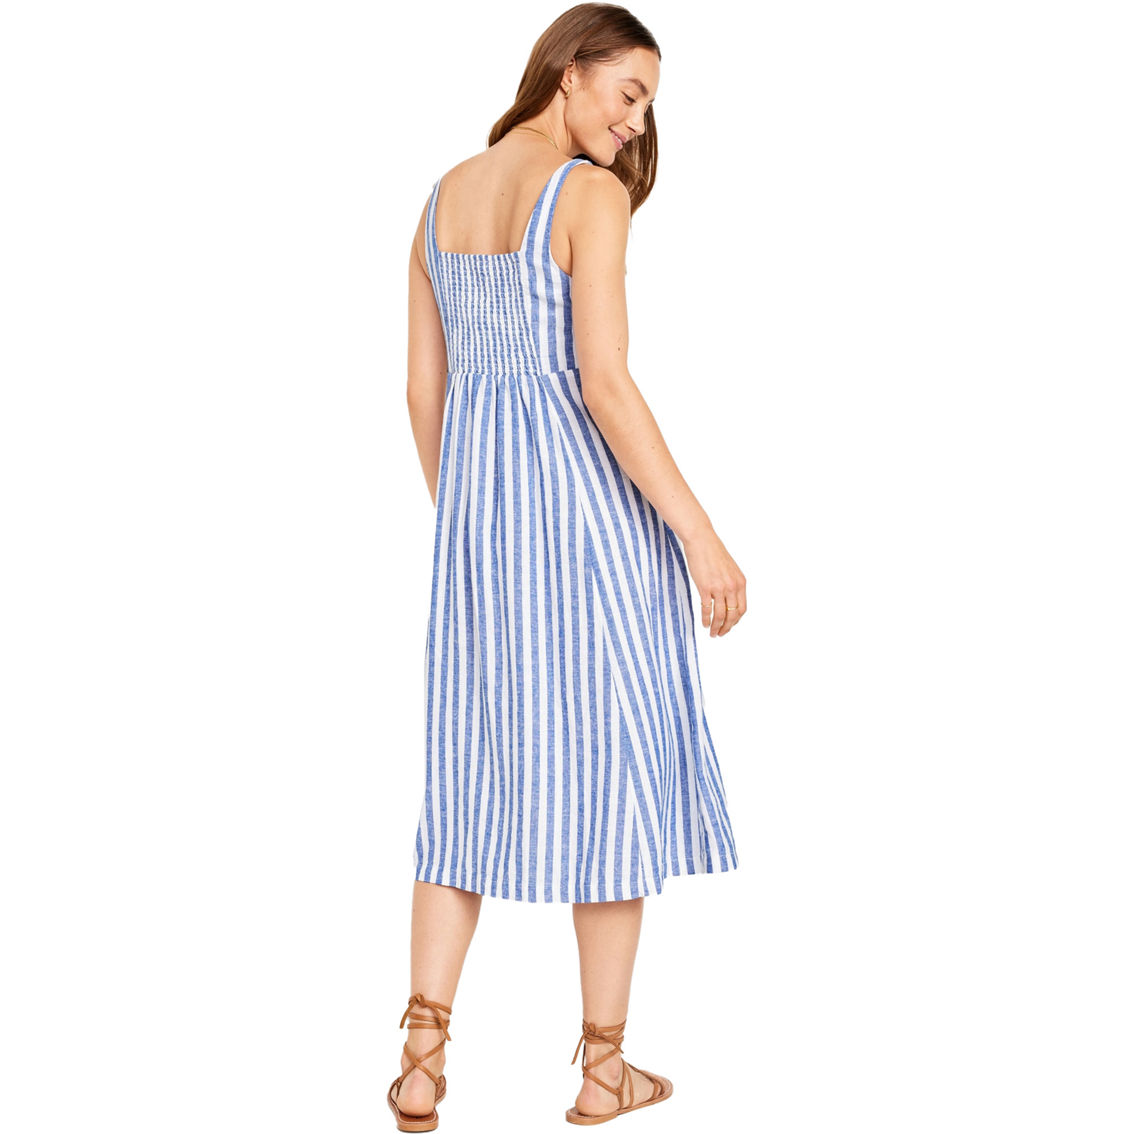 Old Navy Fit and Flare Midi Cami Dress - Image 2 of 3